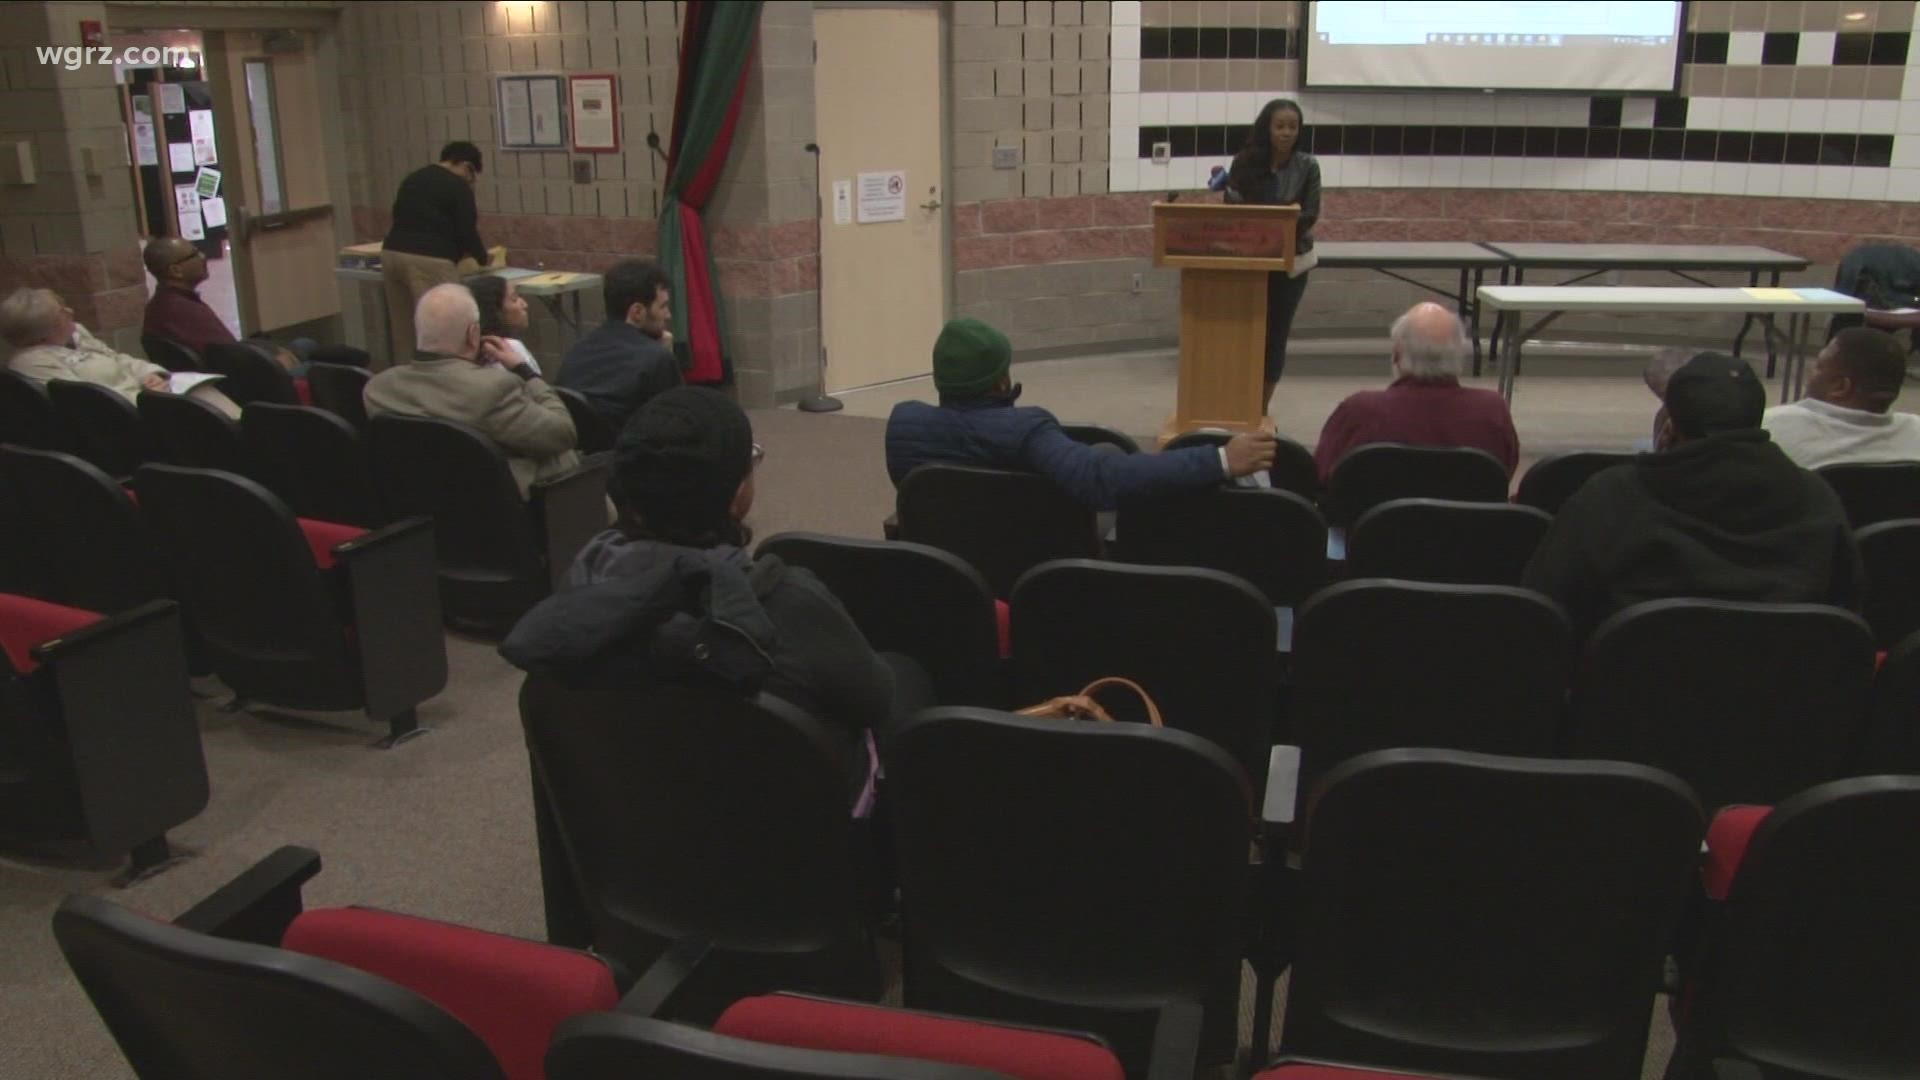 The meeting was about two initiatives they hope to get on the November ballot.